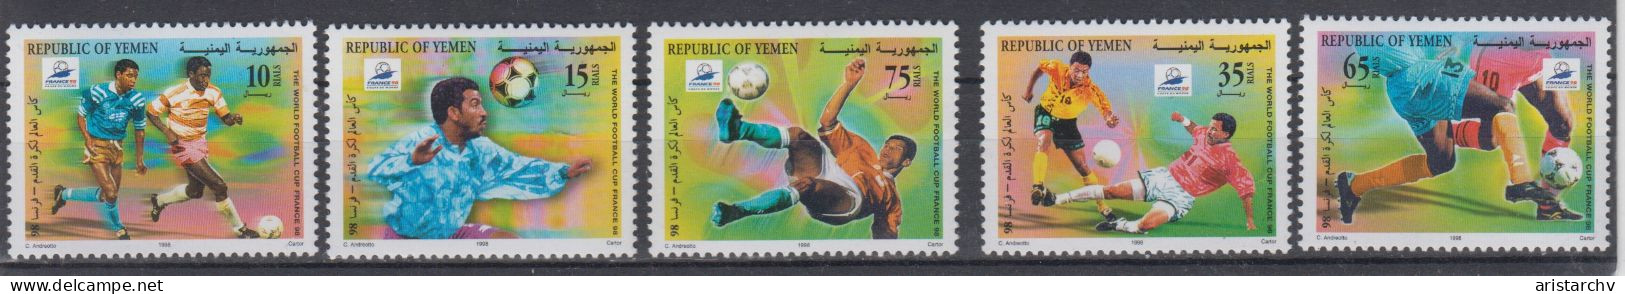 YEMEN 1998 FOOTBALL WORLD CUP SHEETLET AND 5 STAMPS - 1998 – Frankreich